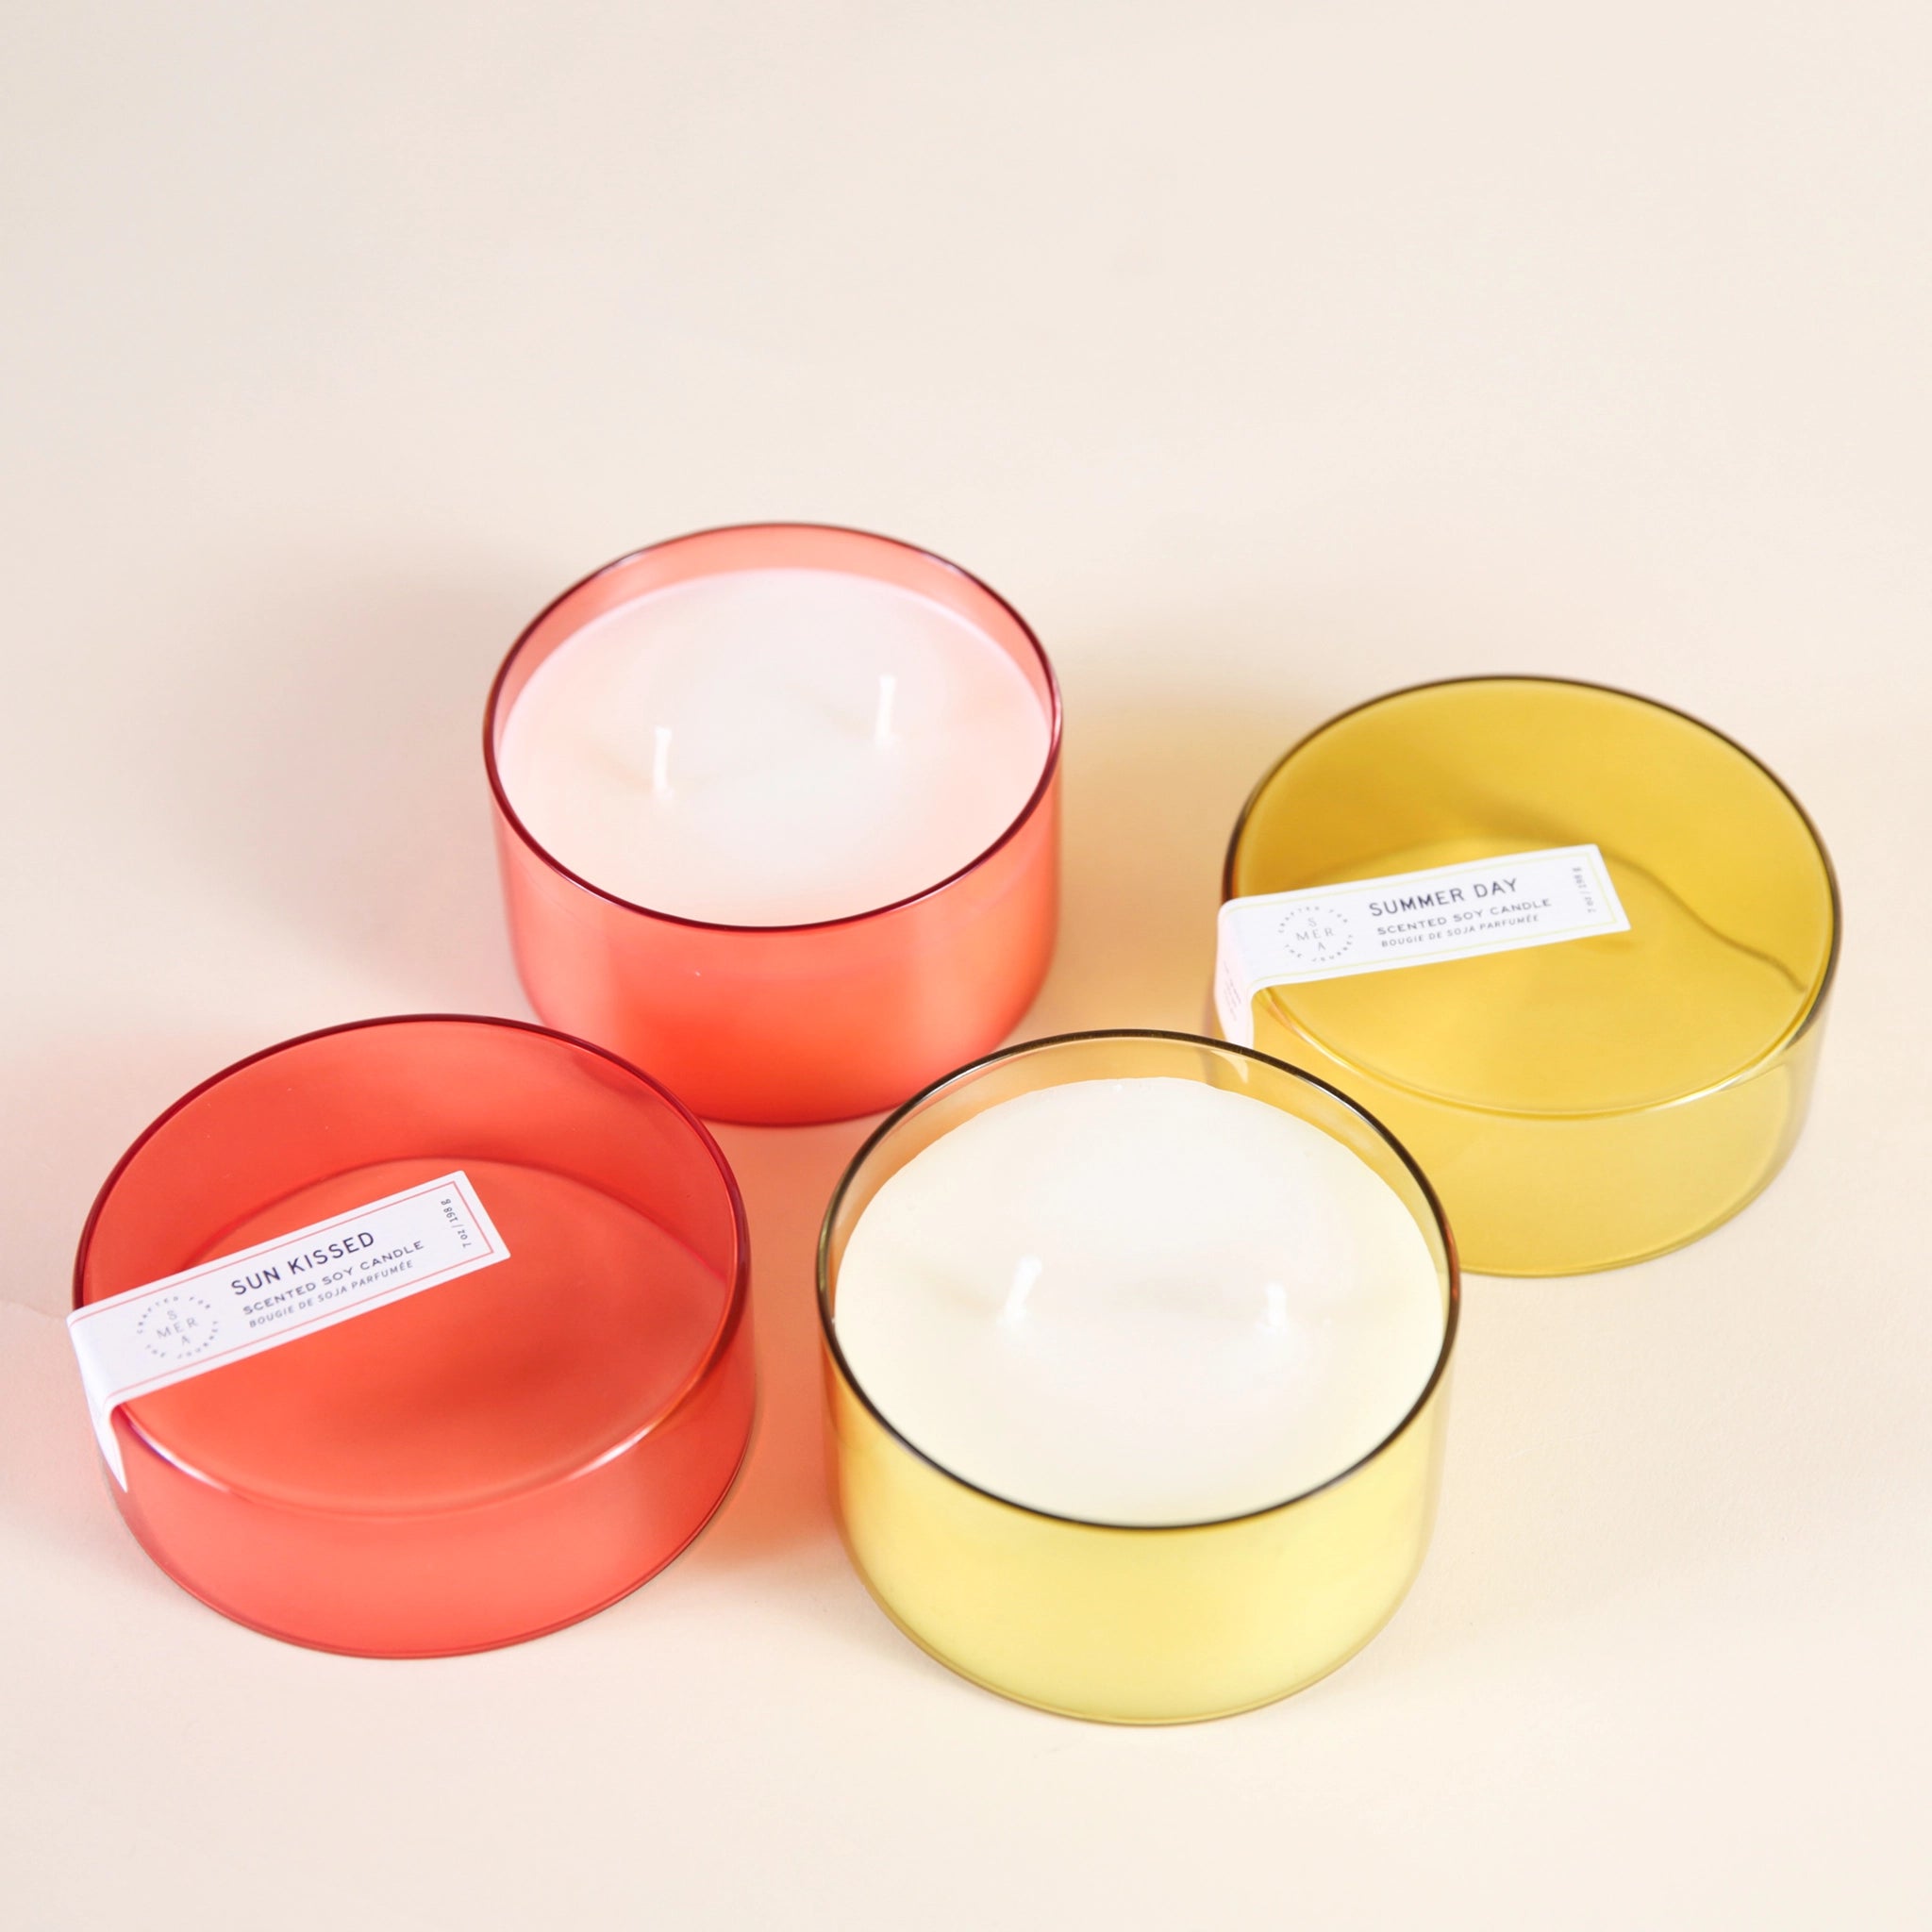 On a cream background is a yellow glass candle with a white double wick candle inside along with a coordinating yellow glass lid sitting next to the same candle but in a red color way. 